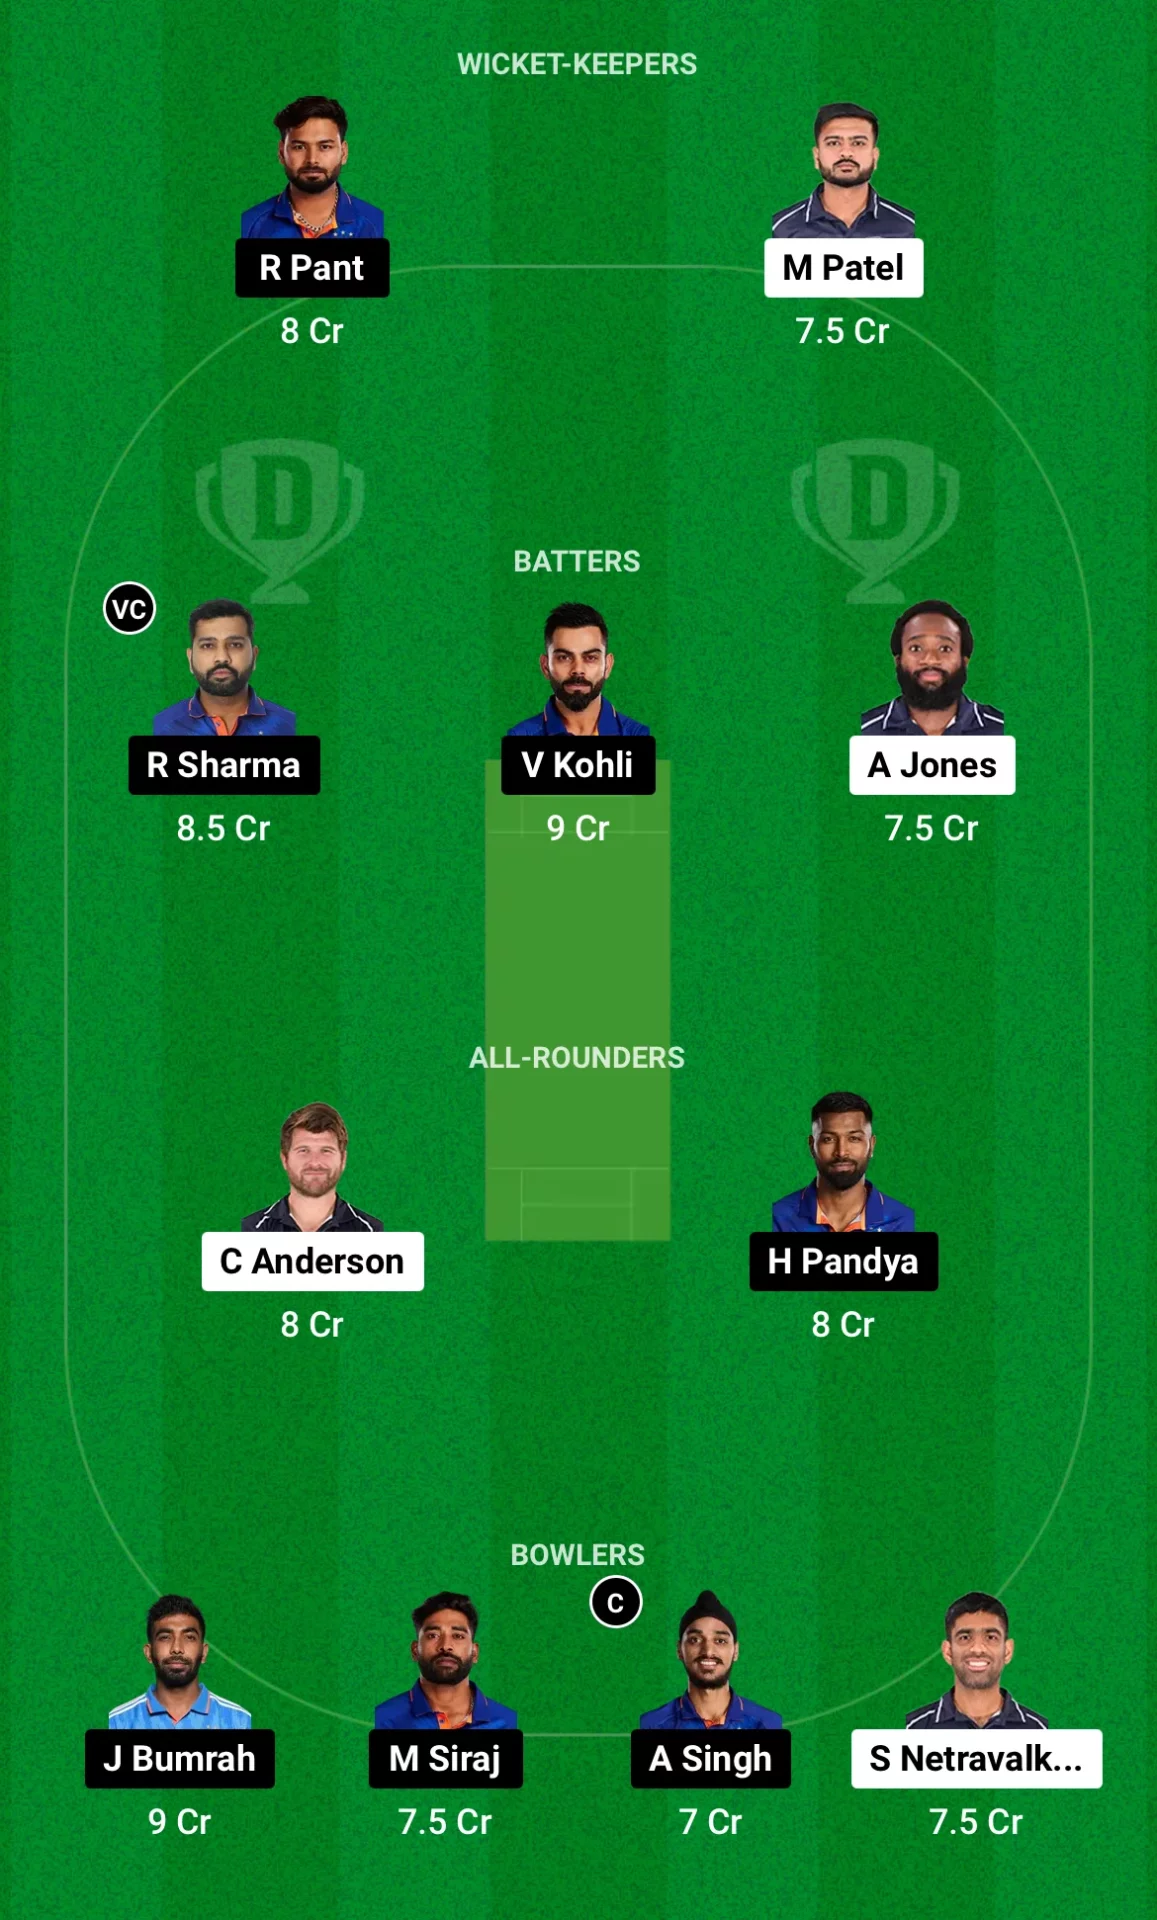 USA vs IND Dream11 Team for today's match (June 12)